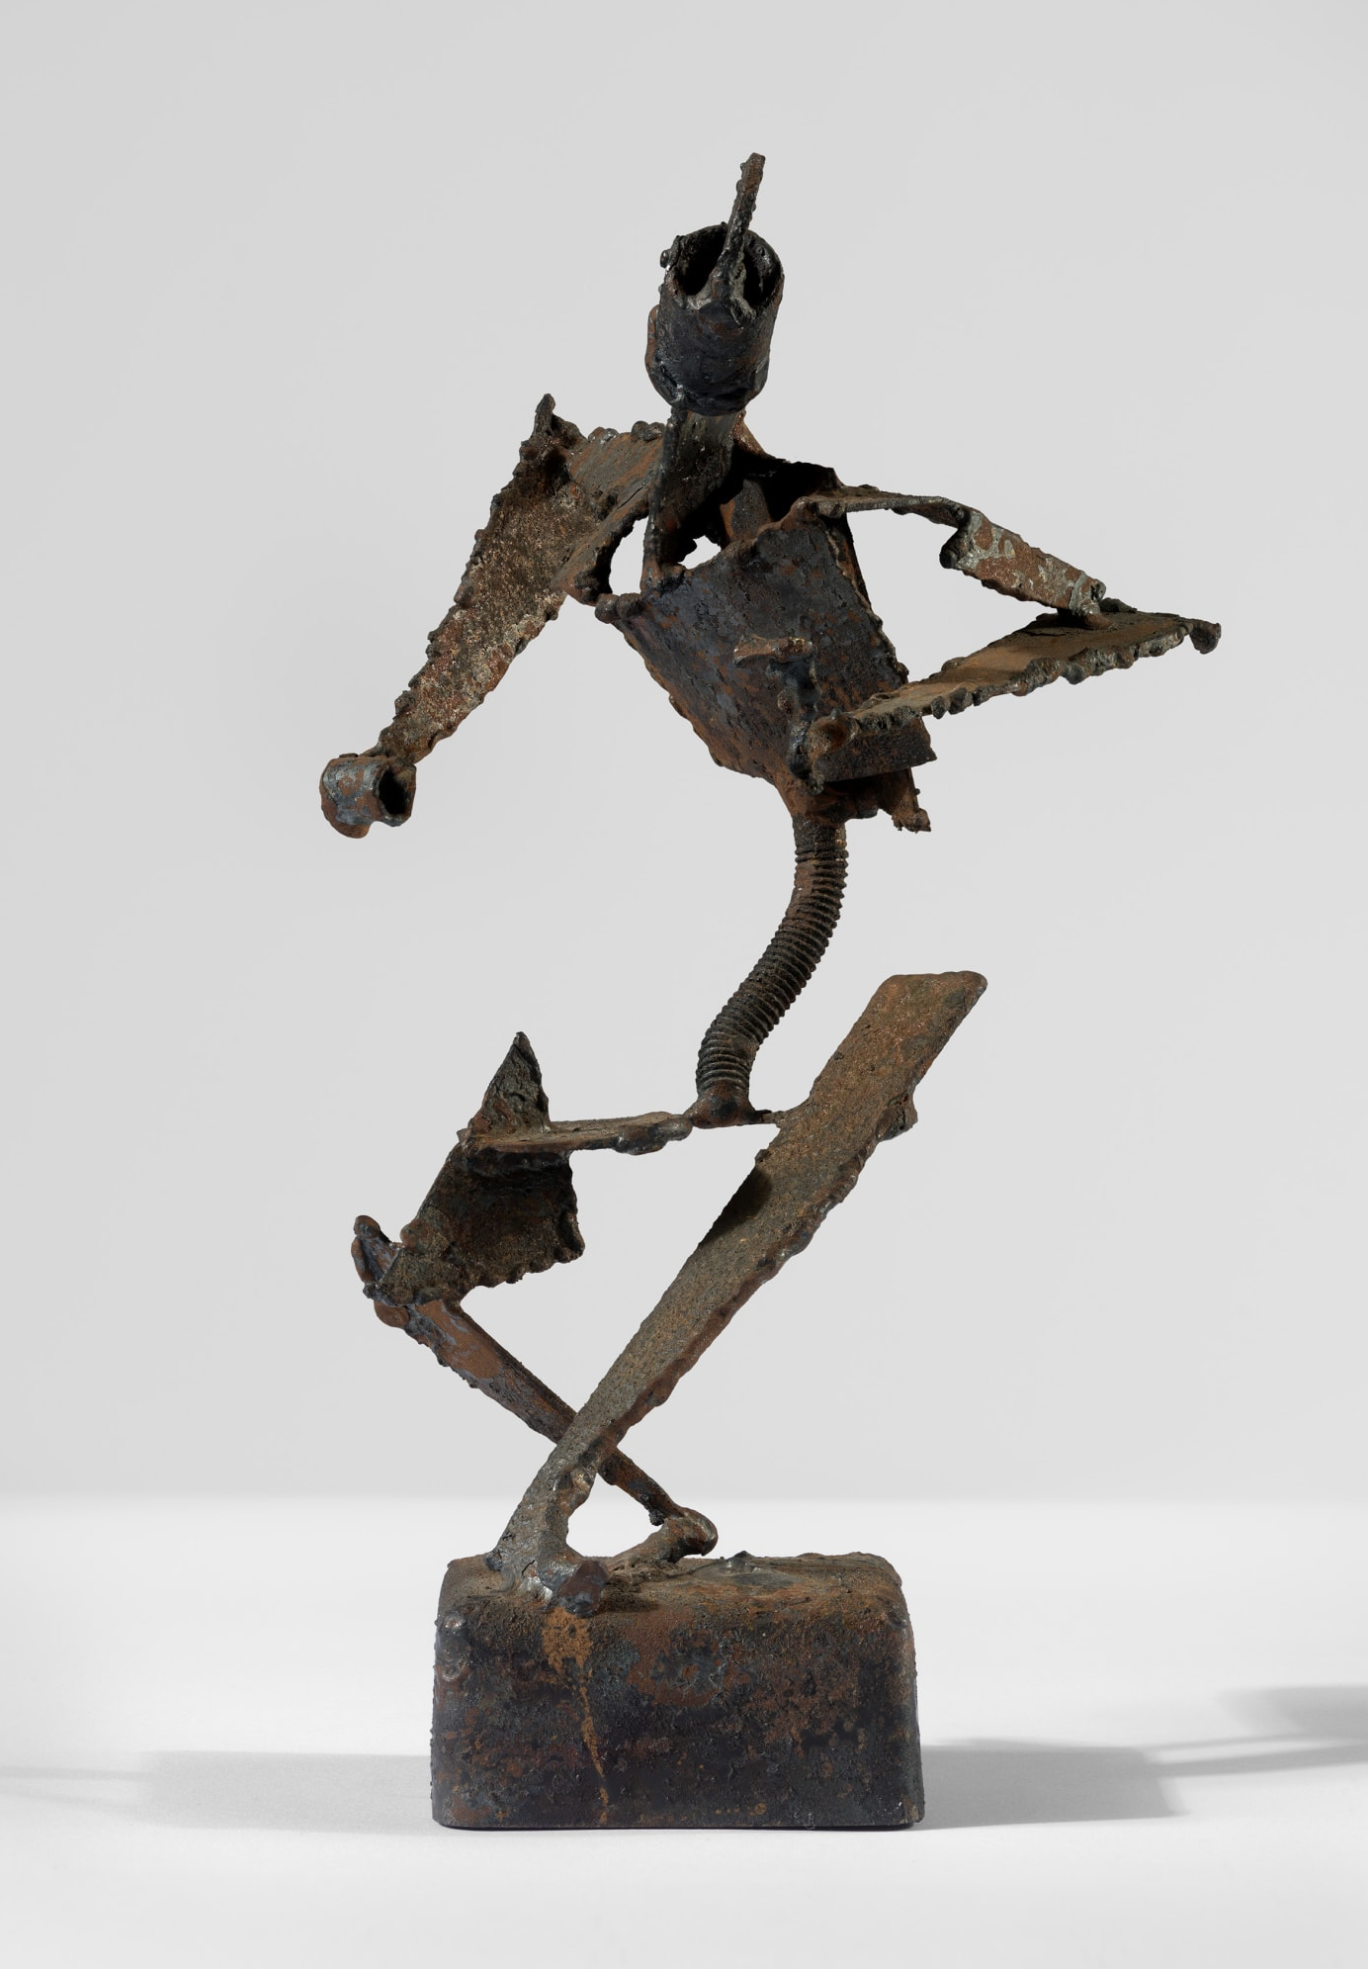  Richard Stankiewicz, Man of Parts, c. 1950-59, iron and mixed metals, 31.4 x 17 x 17.8 cm, installation view, The Box 